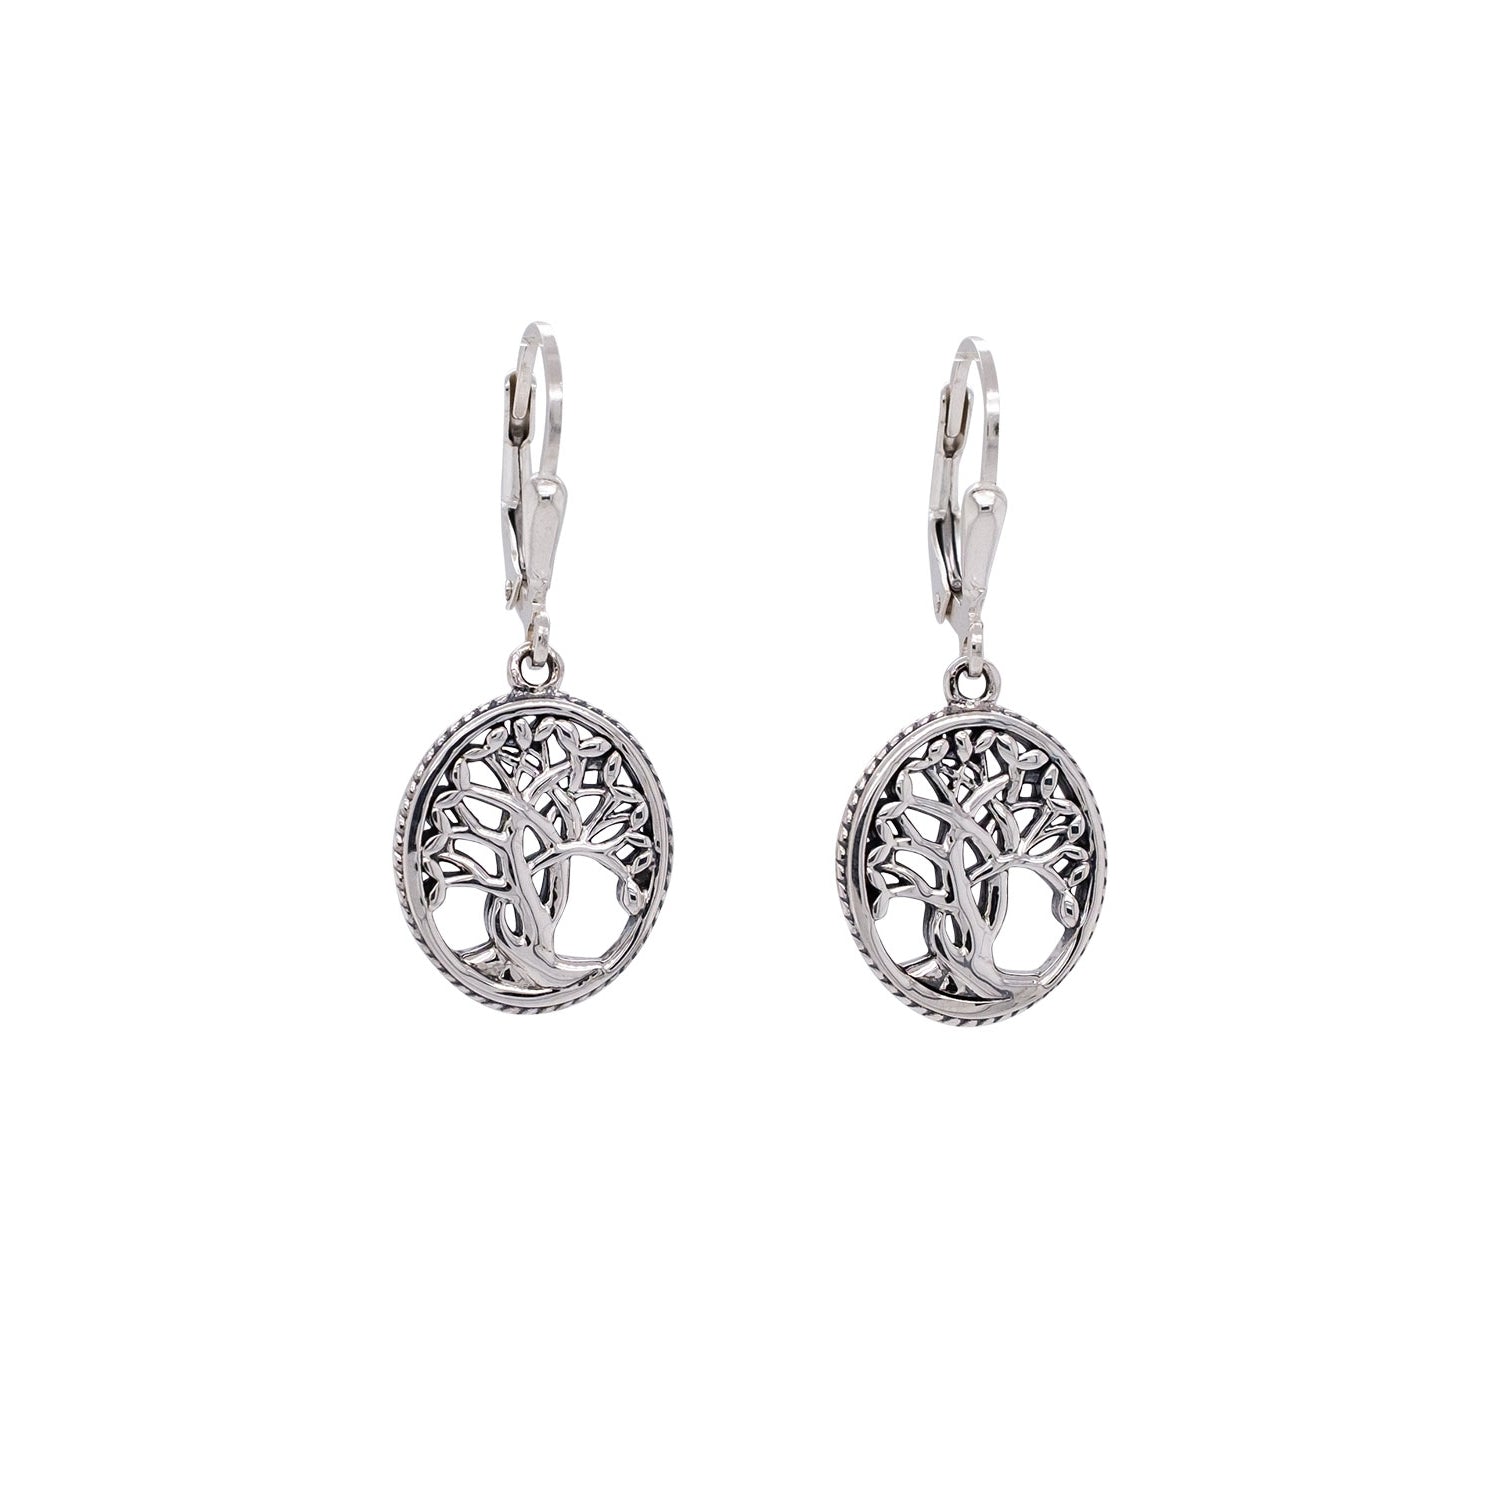 Earrings Tree of Life Leverback Earrings Small from welch and company jewelers near syracuse ny 